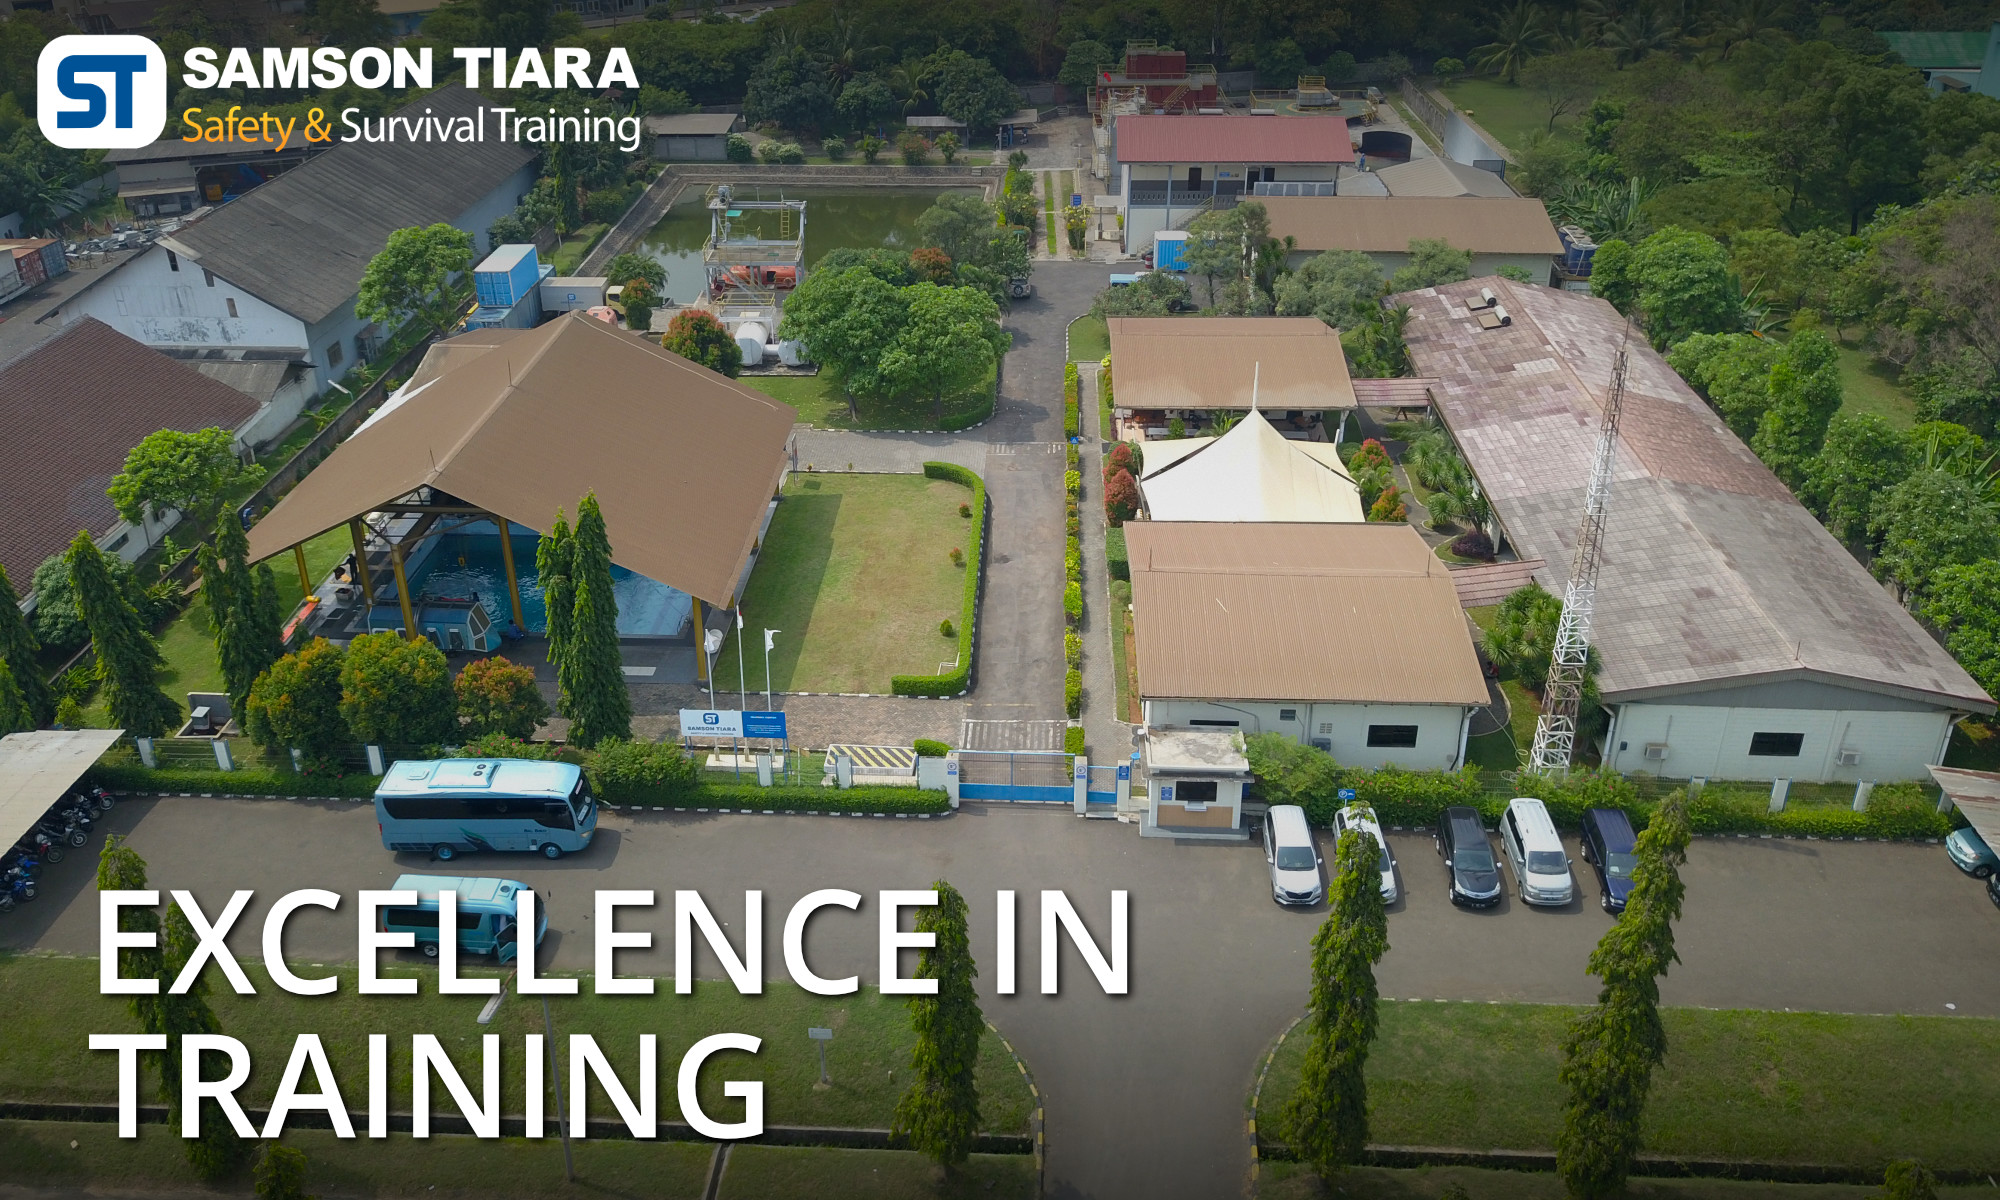 Excellence at Samson Tiara Safety and Survival Training Centre